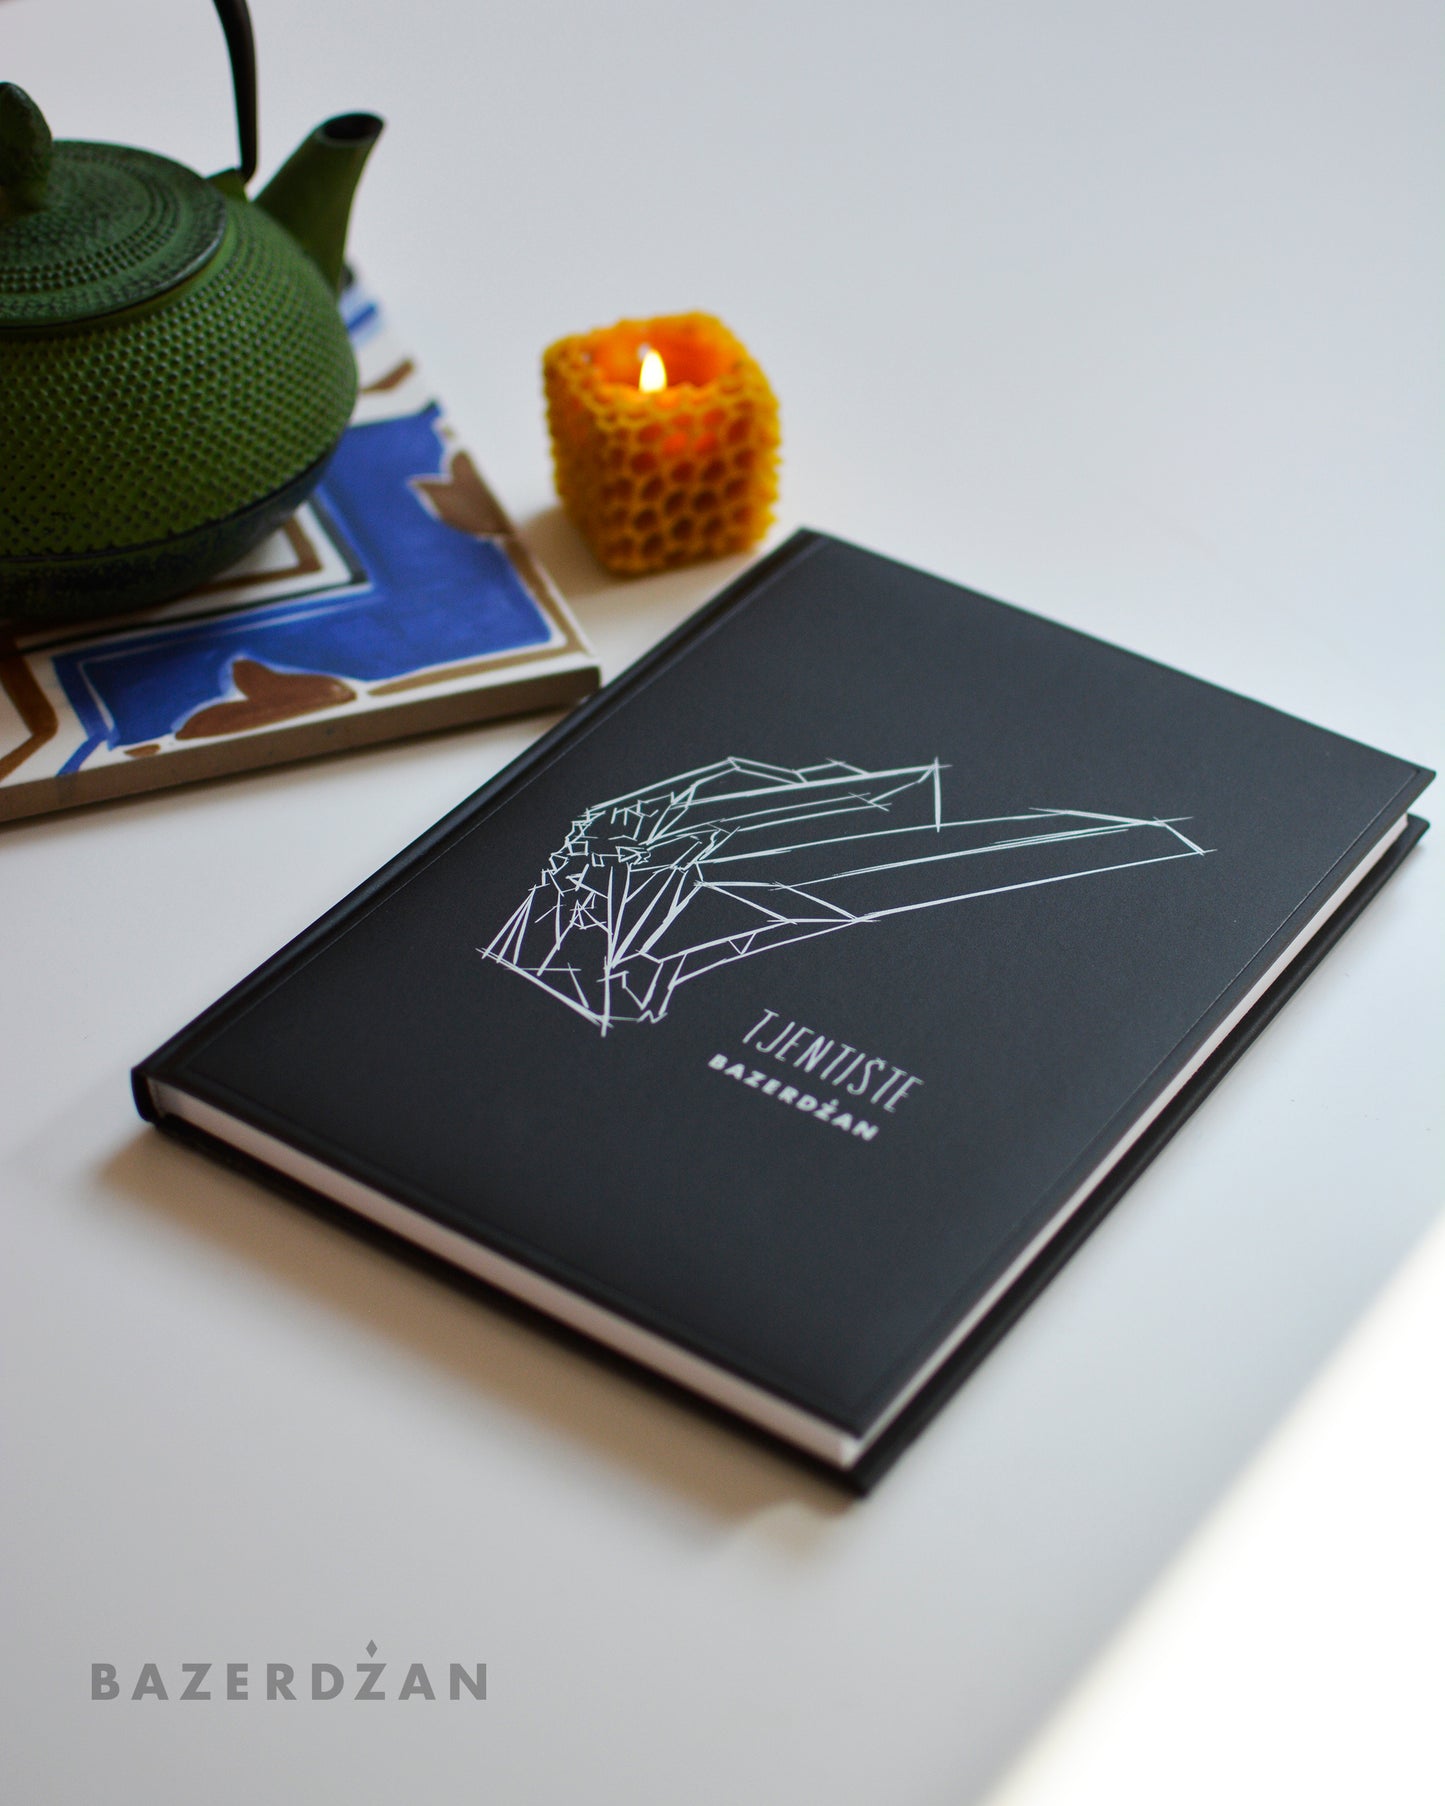 "Valley of Heroes" Notebook, illustrated by Ina Čano - Bazerdzan